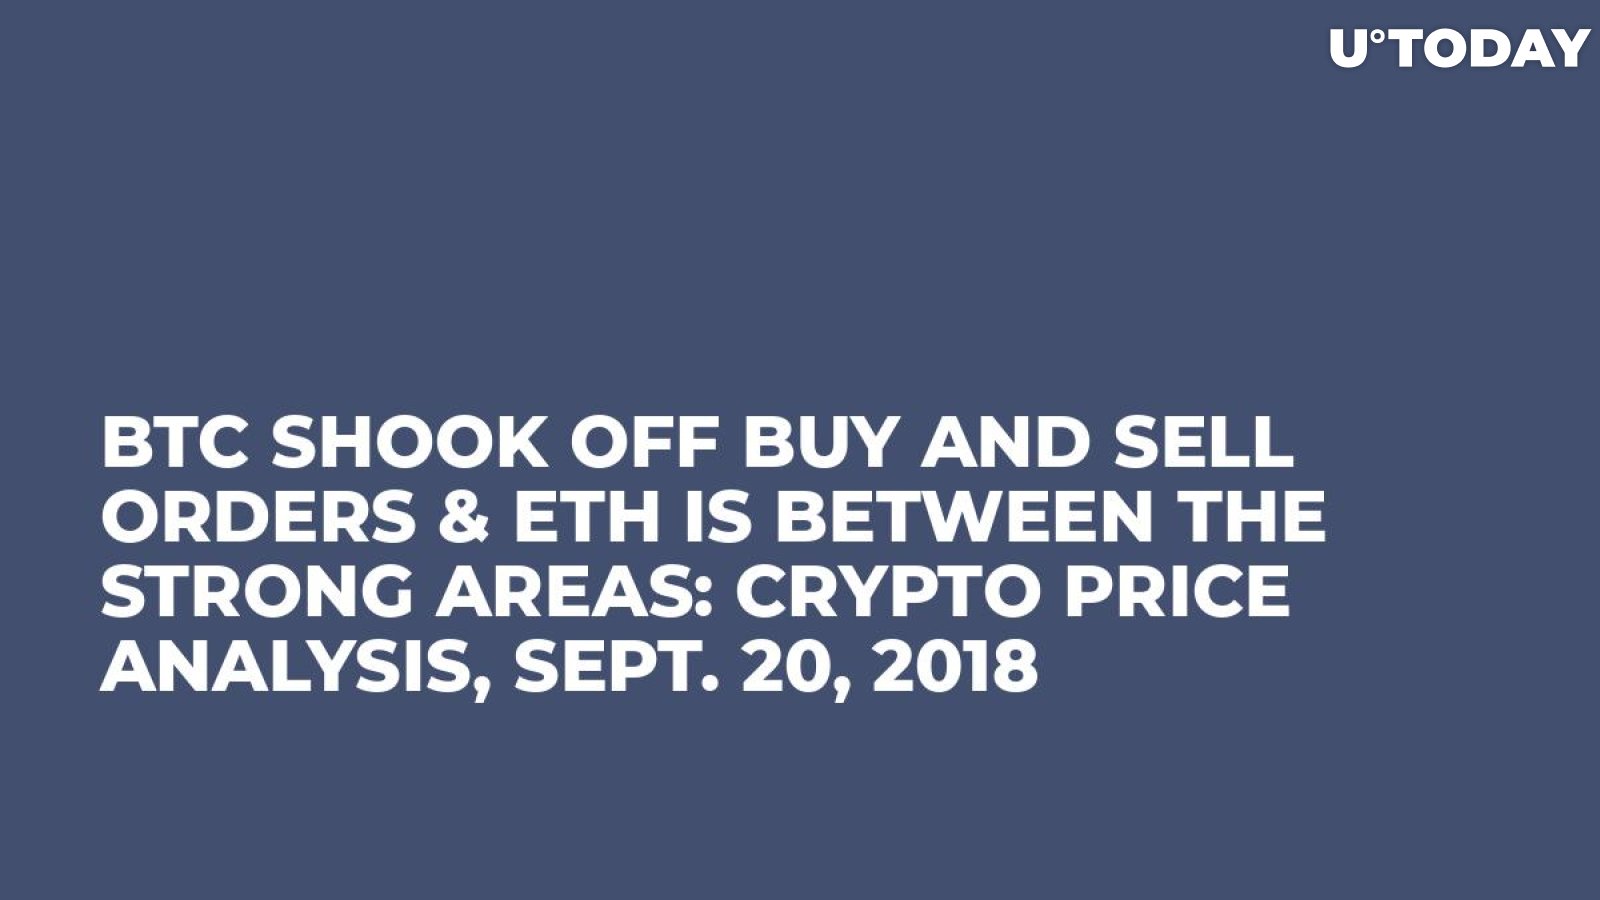 BTC Shook Off Buy and Sell Orders & ETH is Between the Strong Areas: Crypto Price Analysis, Sept. 20, 2018